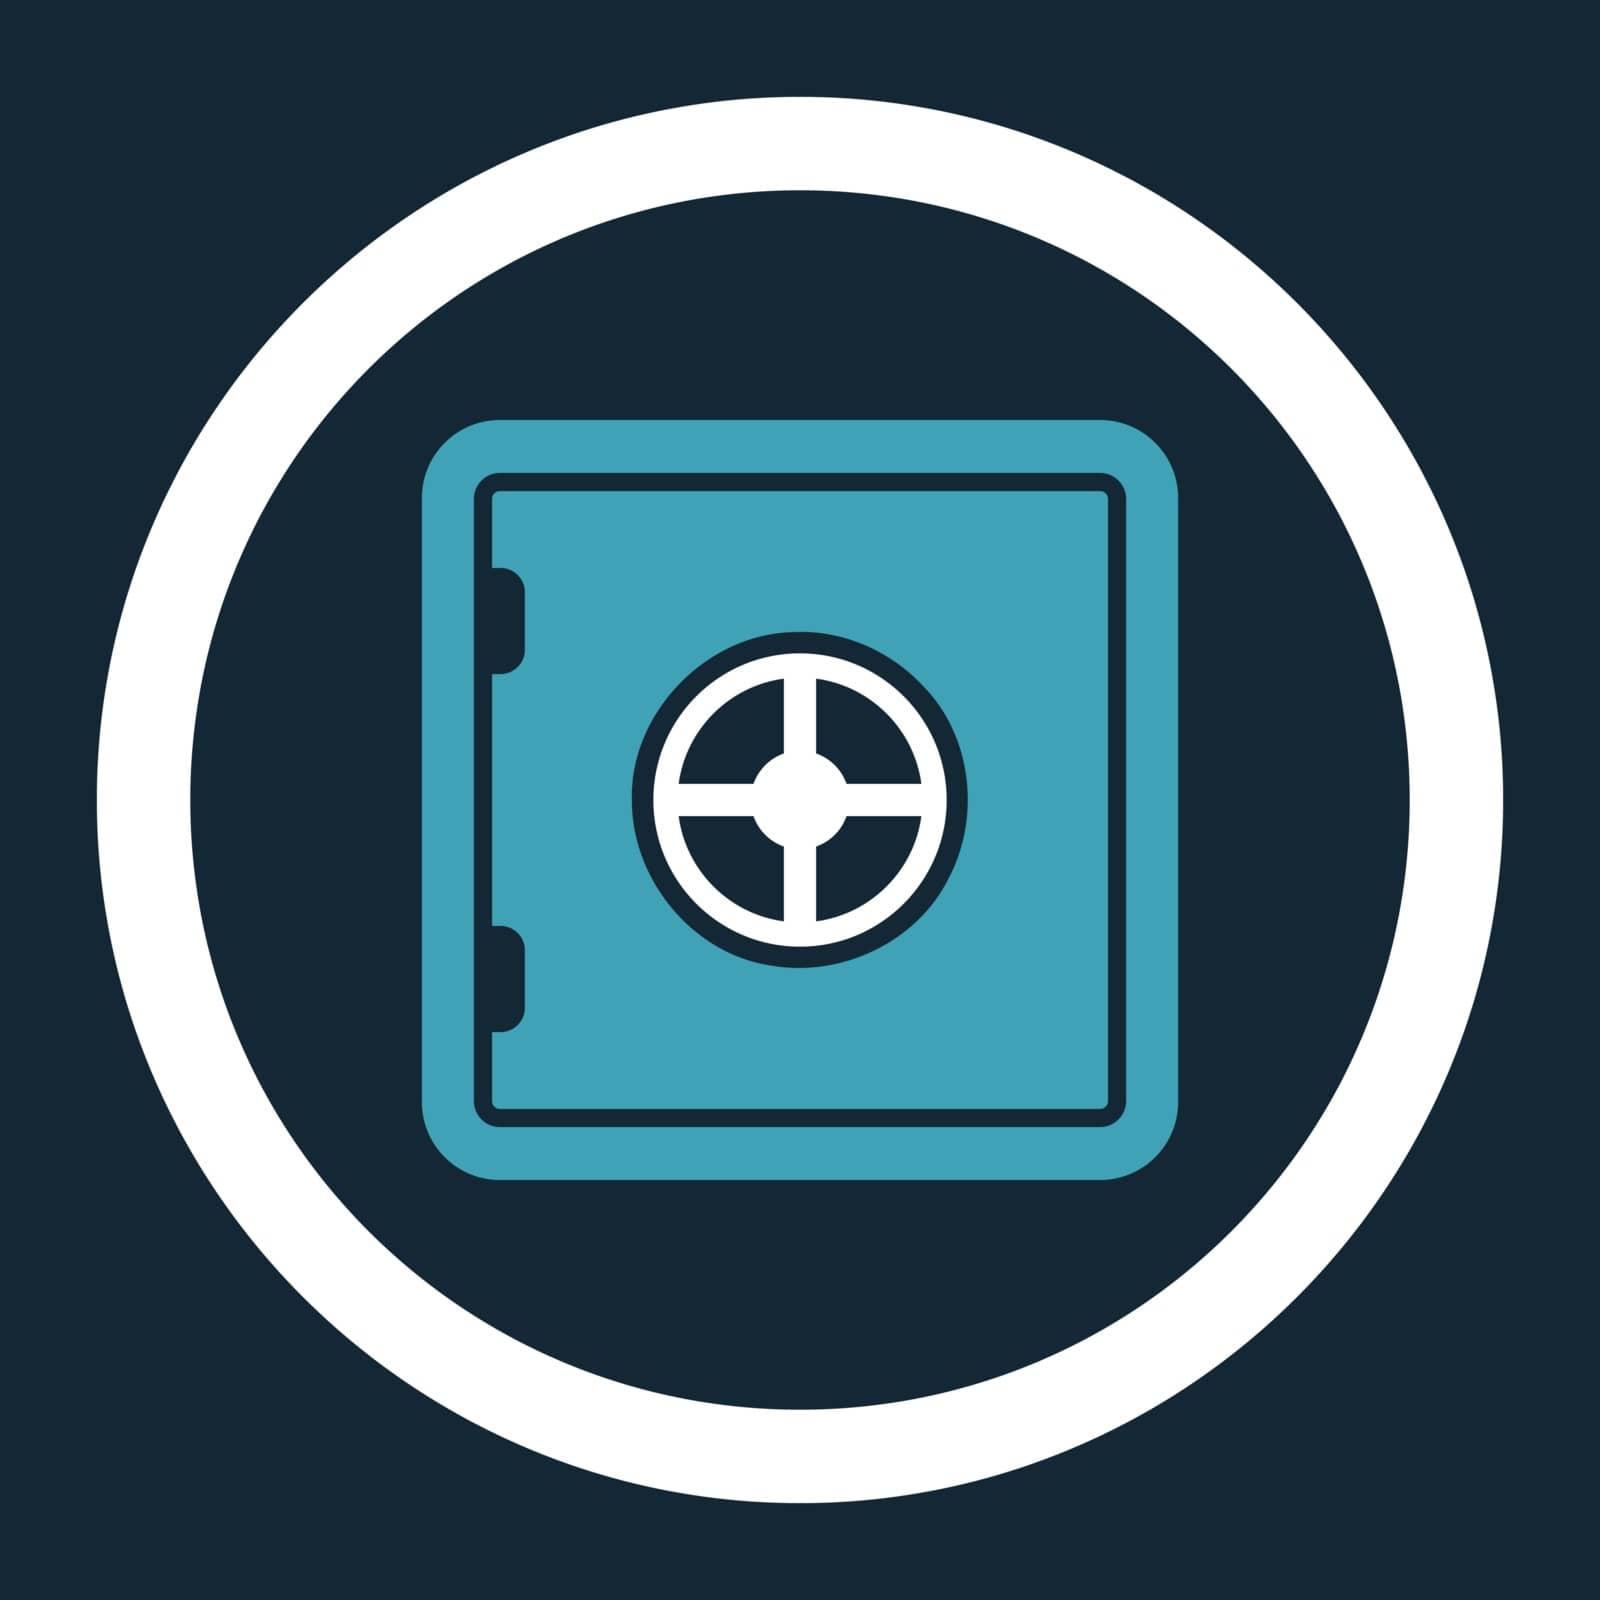 Safe vector icon. This flat rounded symbol uses blue and white colors and isolated on a dark blue background.